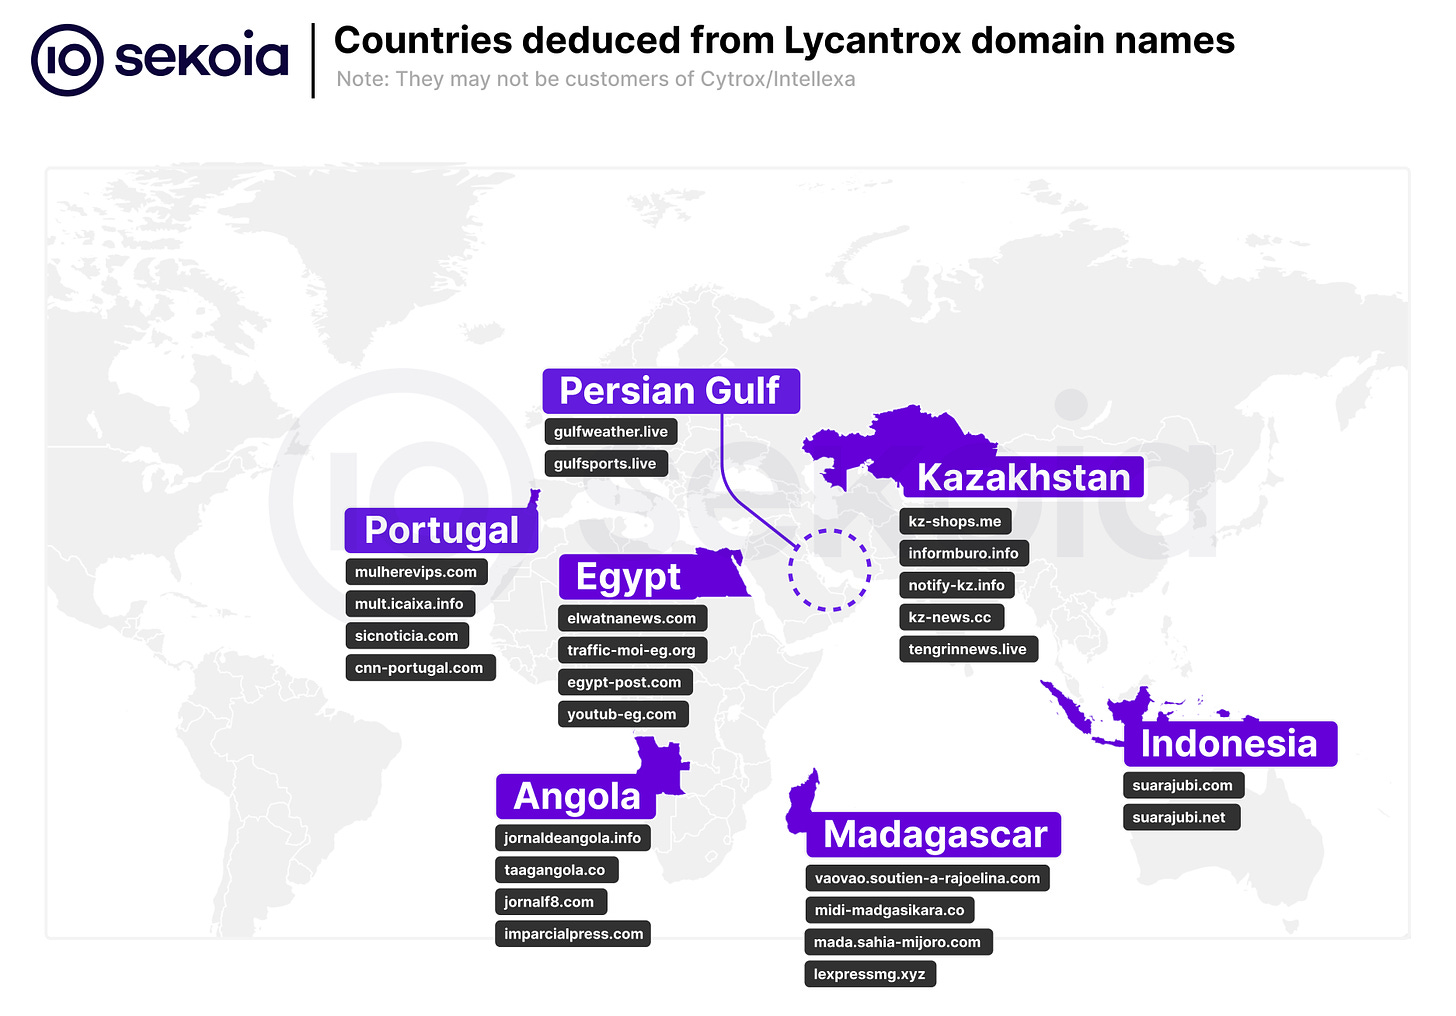 Countries deduced from Lycantrox domain names. Source: Sekoia.io TDR Team